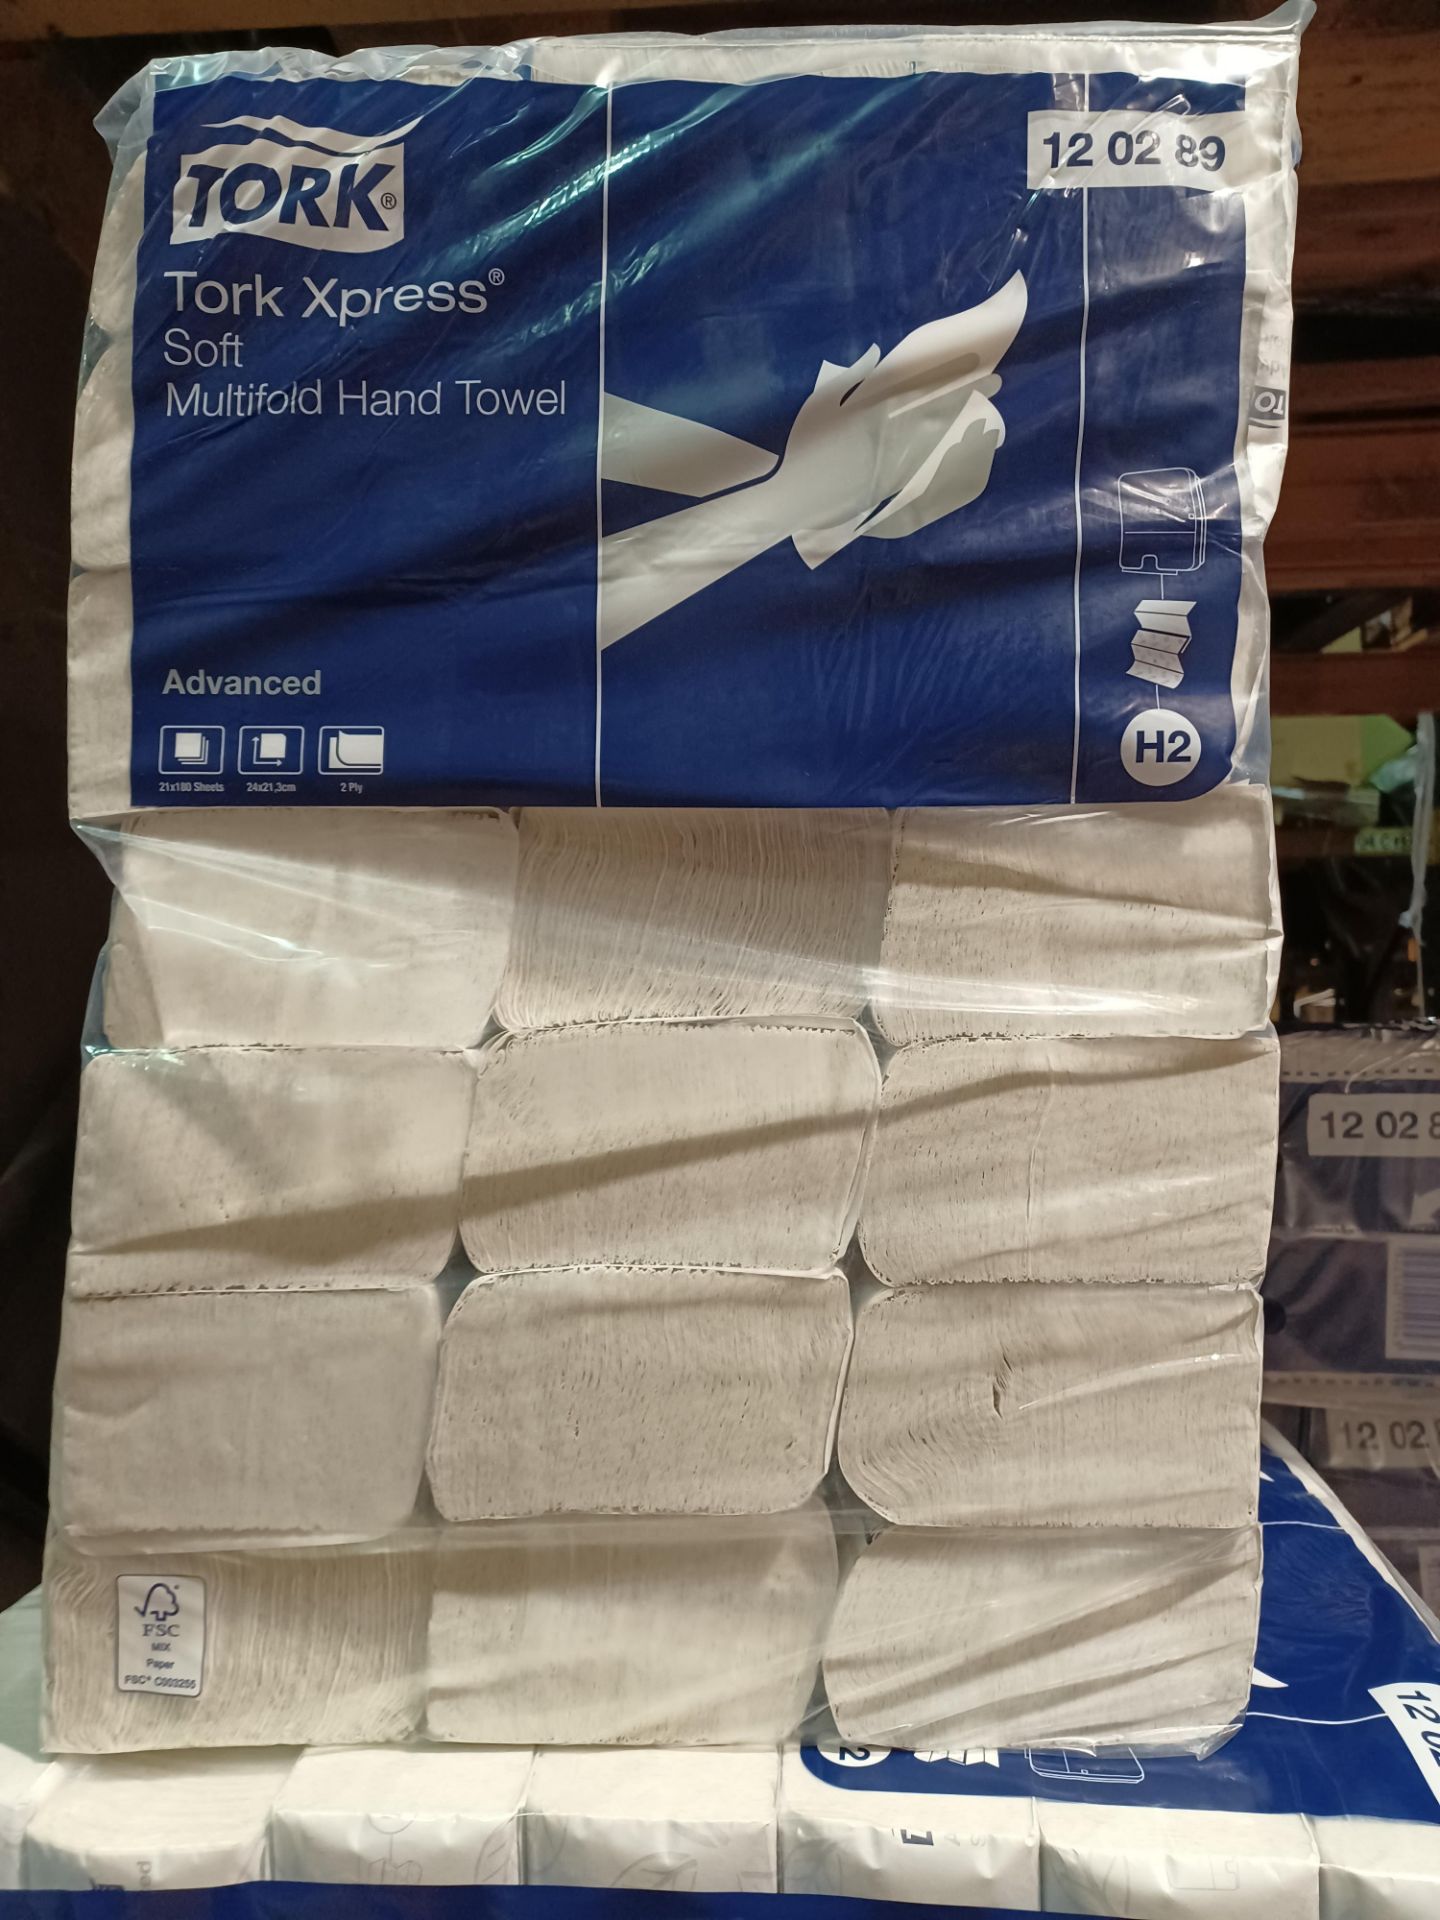 4 X BRAND NEW PACKS OF TORK XPRESS SOFT MULTIFOLD HAND TOWELS ADVANCED 21 SLEEVES CONTAINING